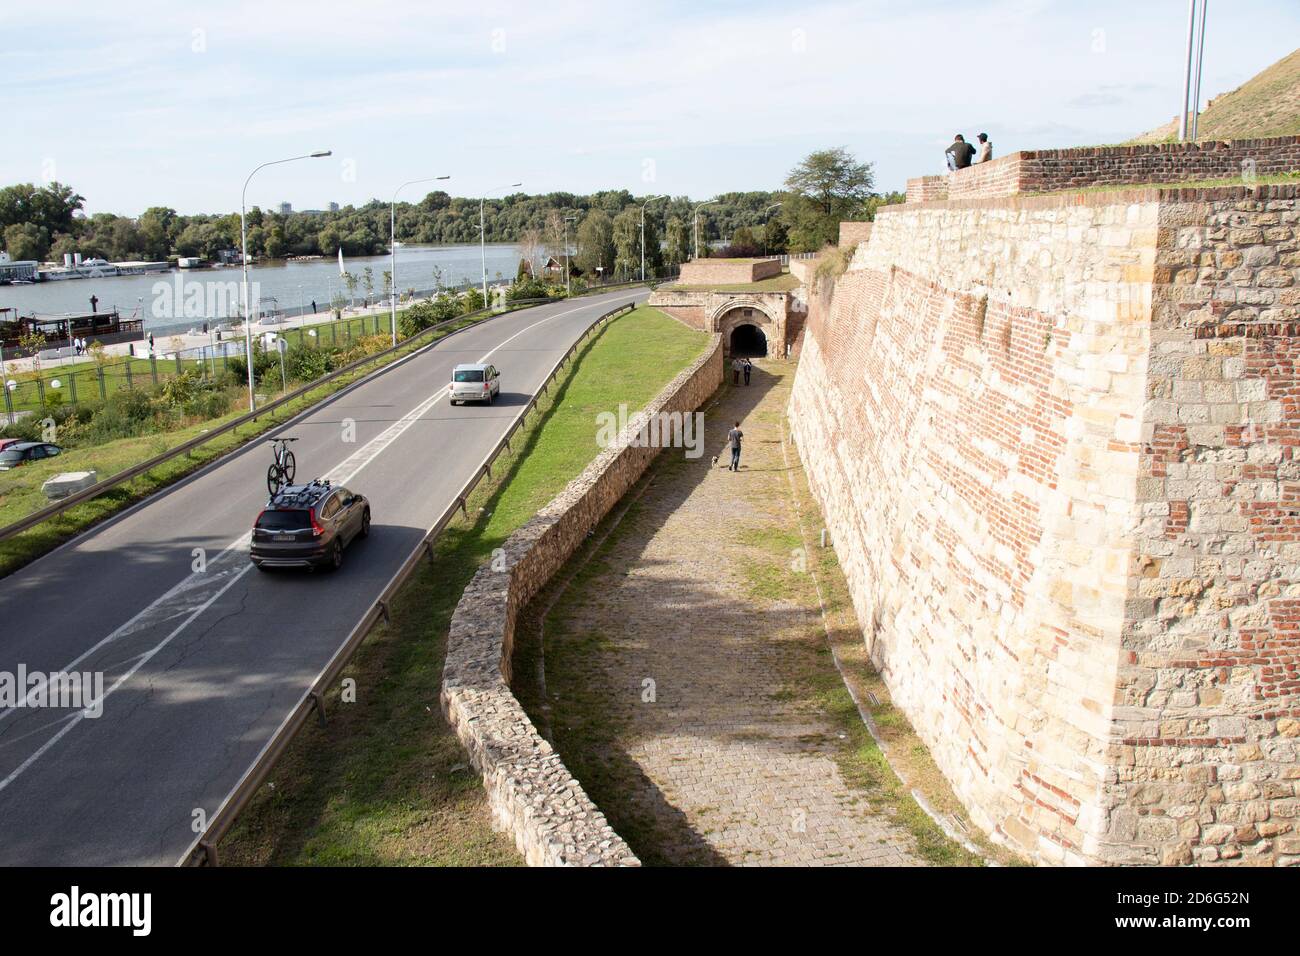 Belgrade, Serbia - October 09, 2020: People sitting and walking on foot path of fortress Kalemegdan, cars passing by on the street and the river water Stock Photo